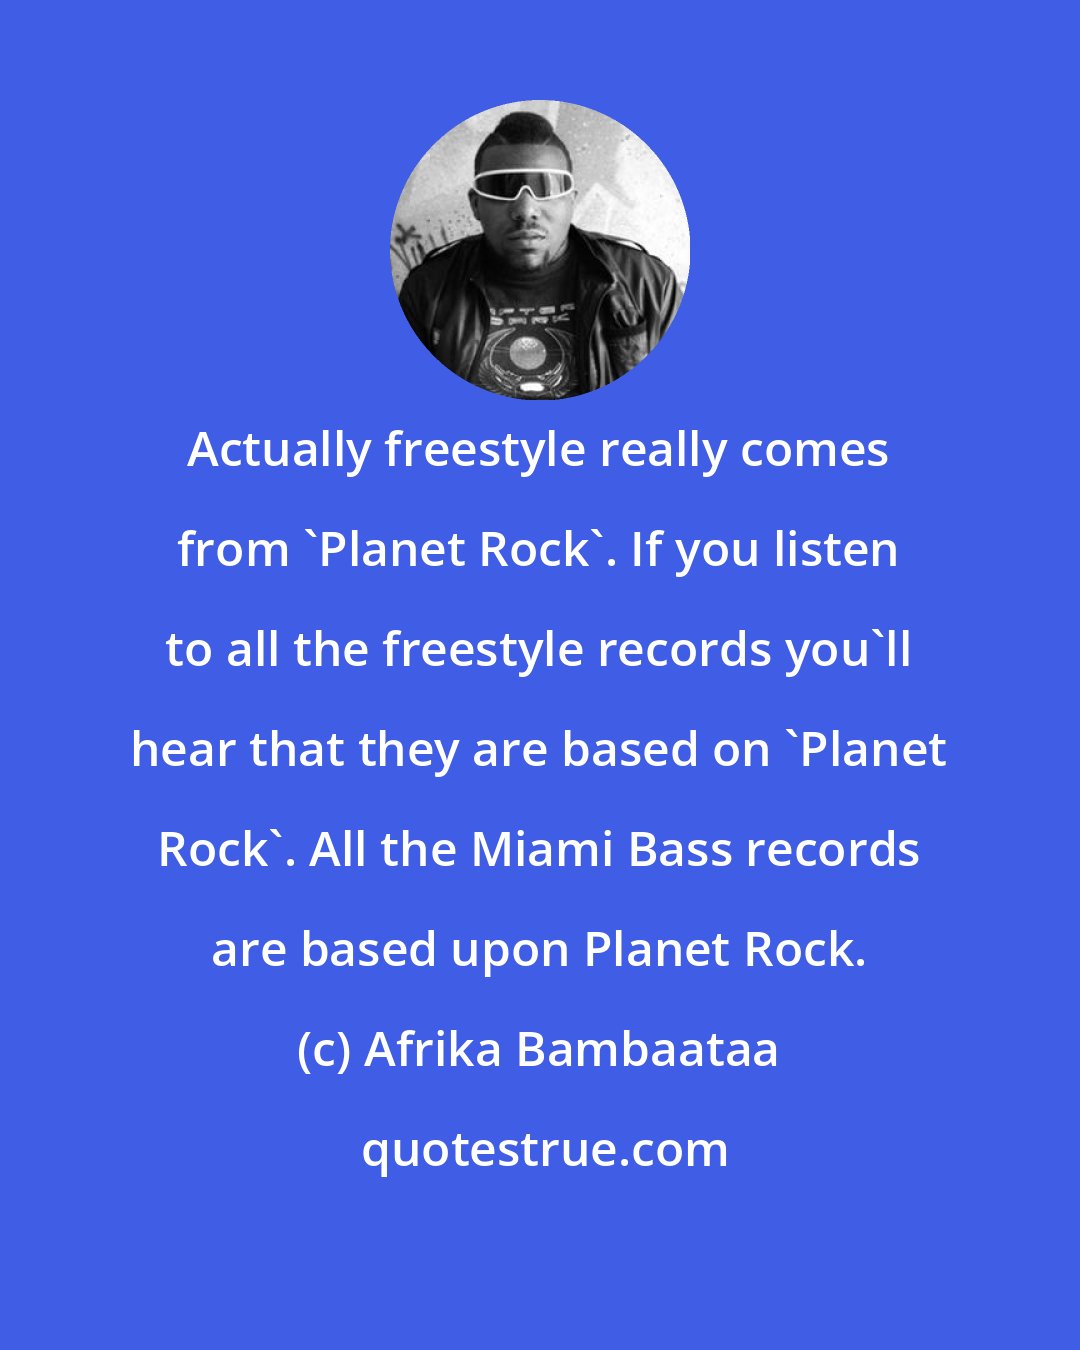 Afrika Bambaataa: Actually freestyle really comes from 'Planet Rock'. If you listen to all the freestyle records you'll hear that they are based on 'Planet Rock'. All the Miami Bass records are based upon Planet Rock.